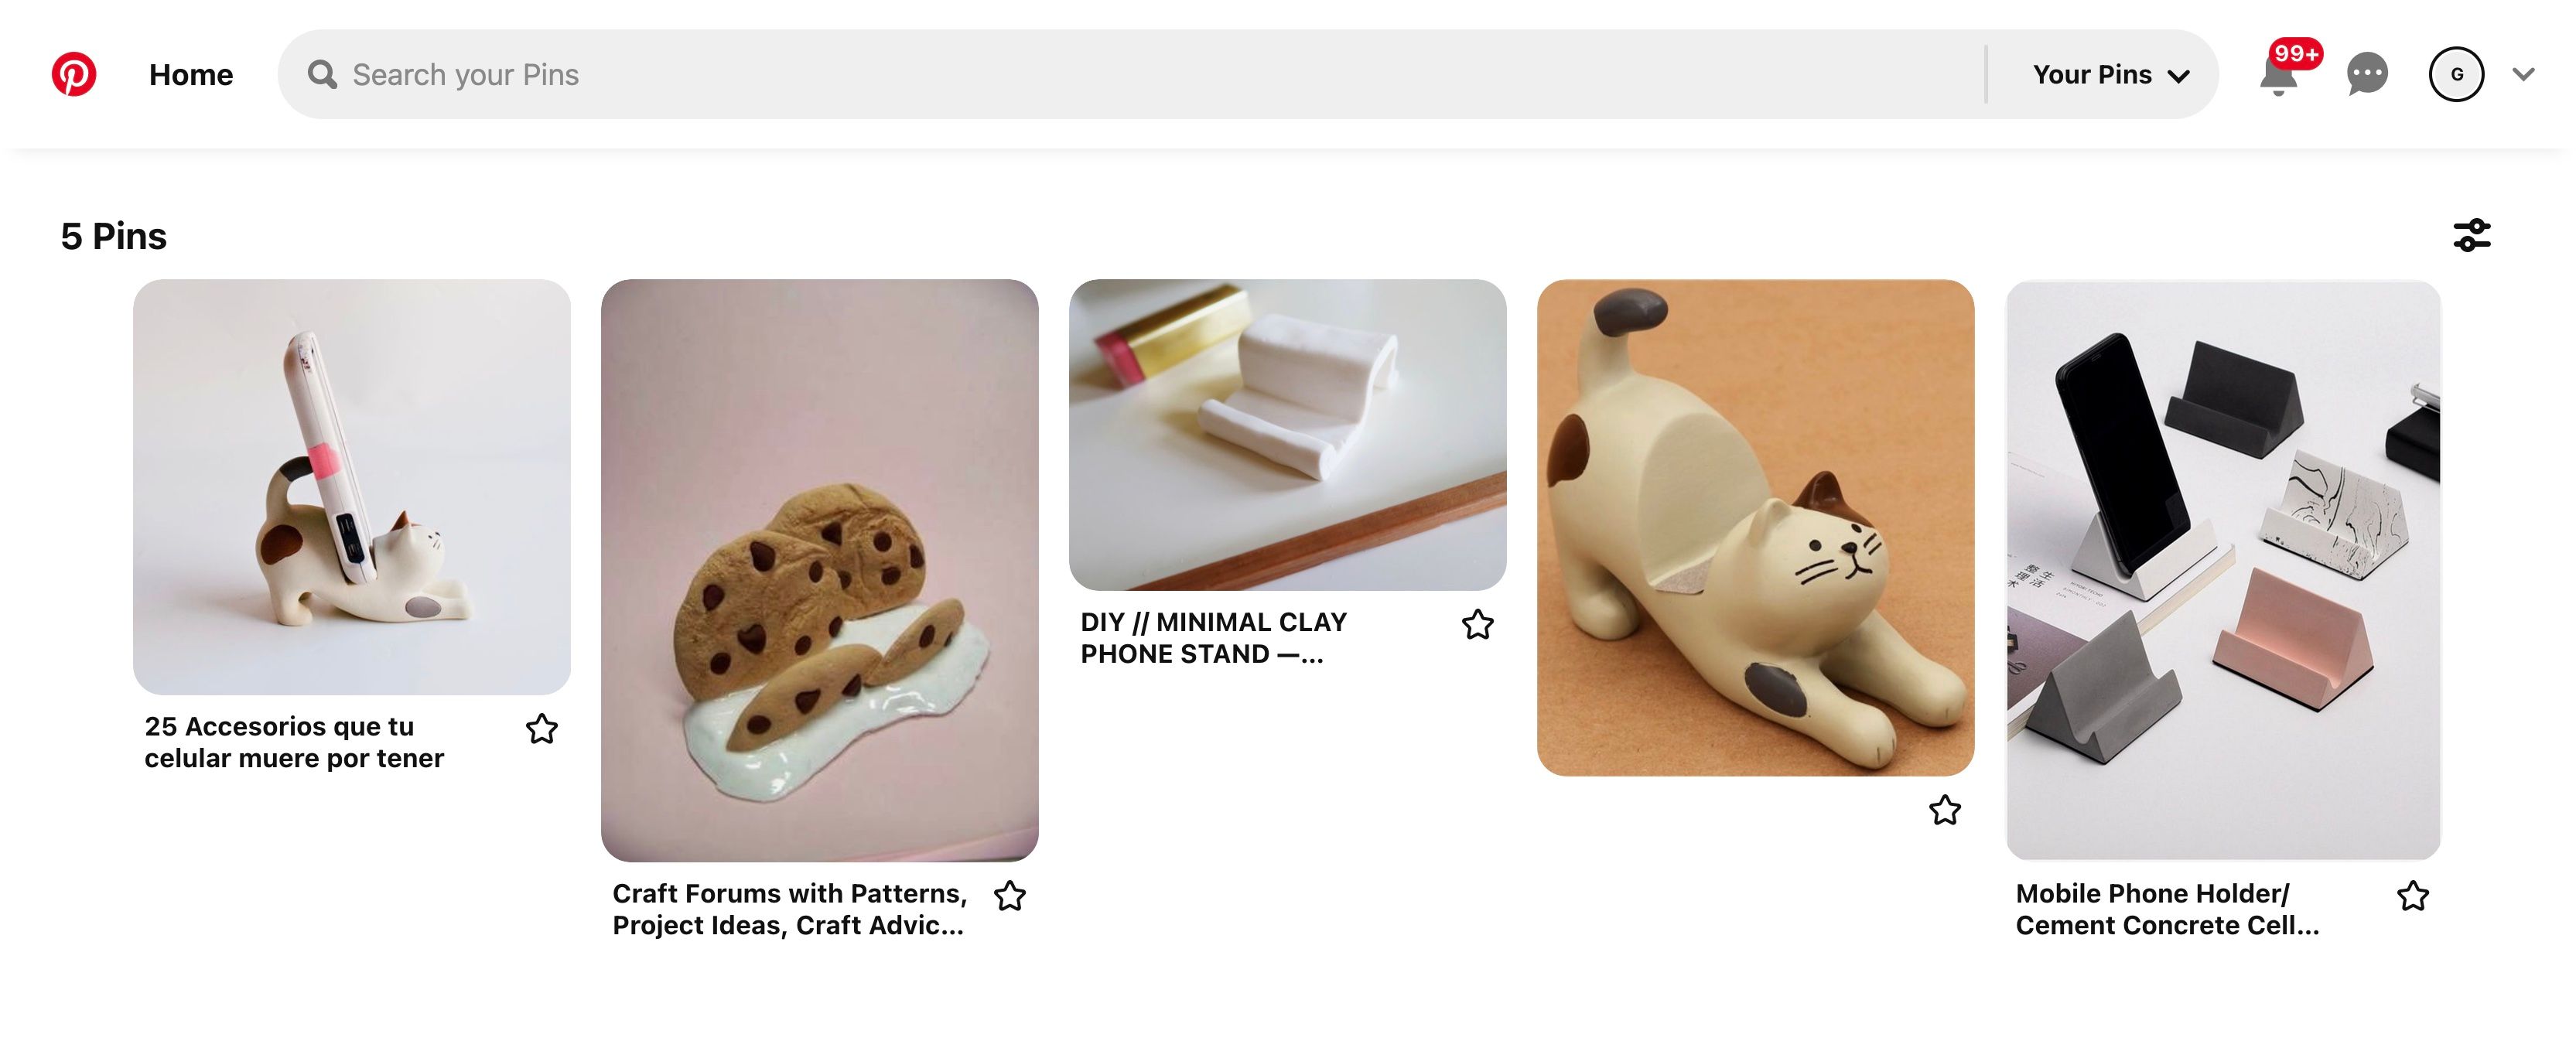 A screenshot from the website Pinterest showing different phone stands such as a stand in the shape of a cat, some chocolate chip cookies, and other geometric shapes